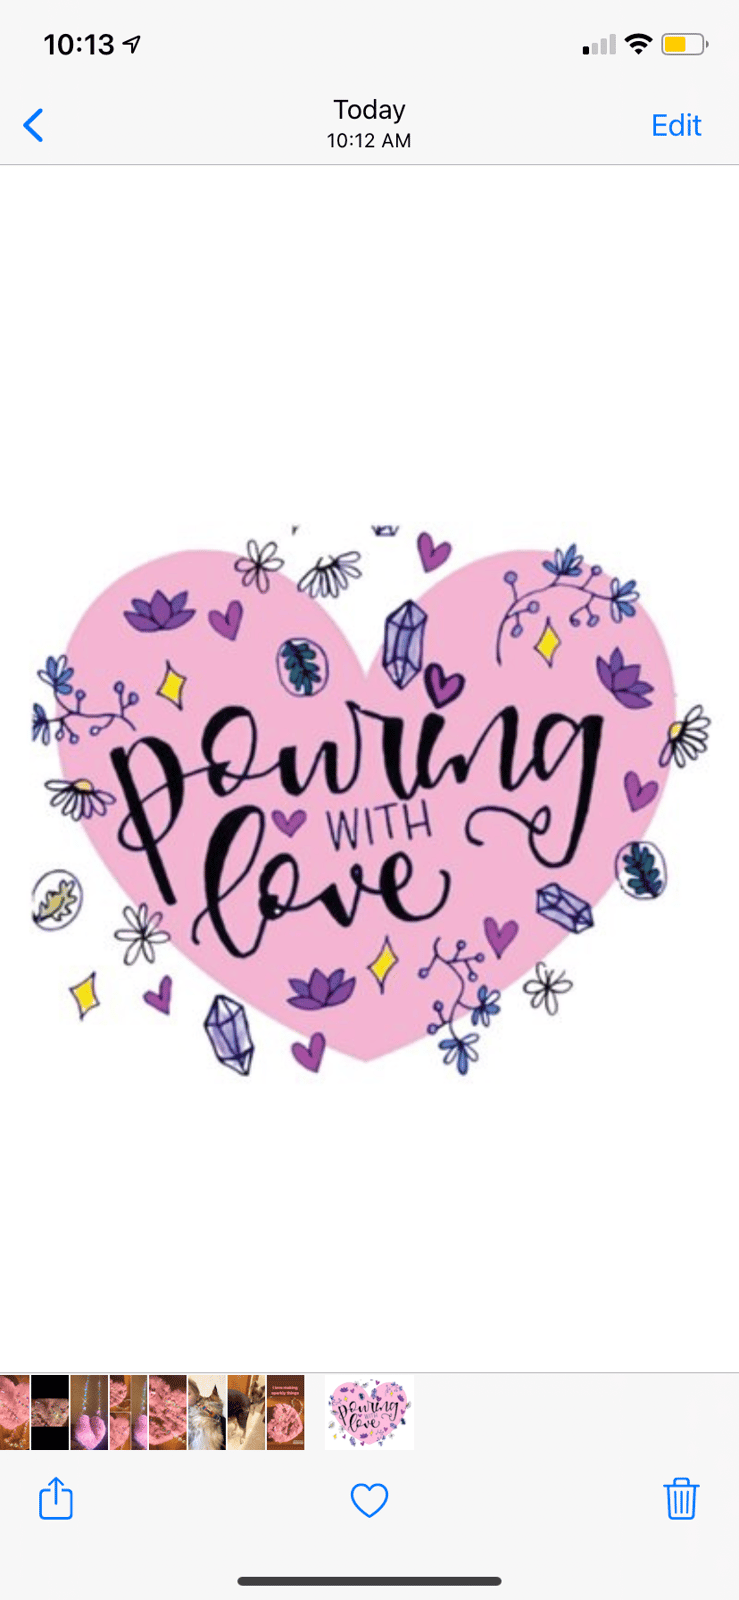 Pouring With Love's account image